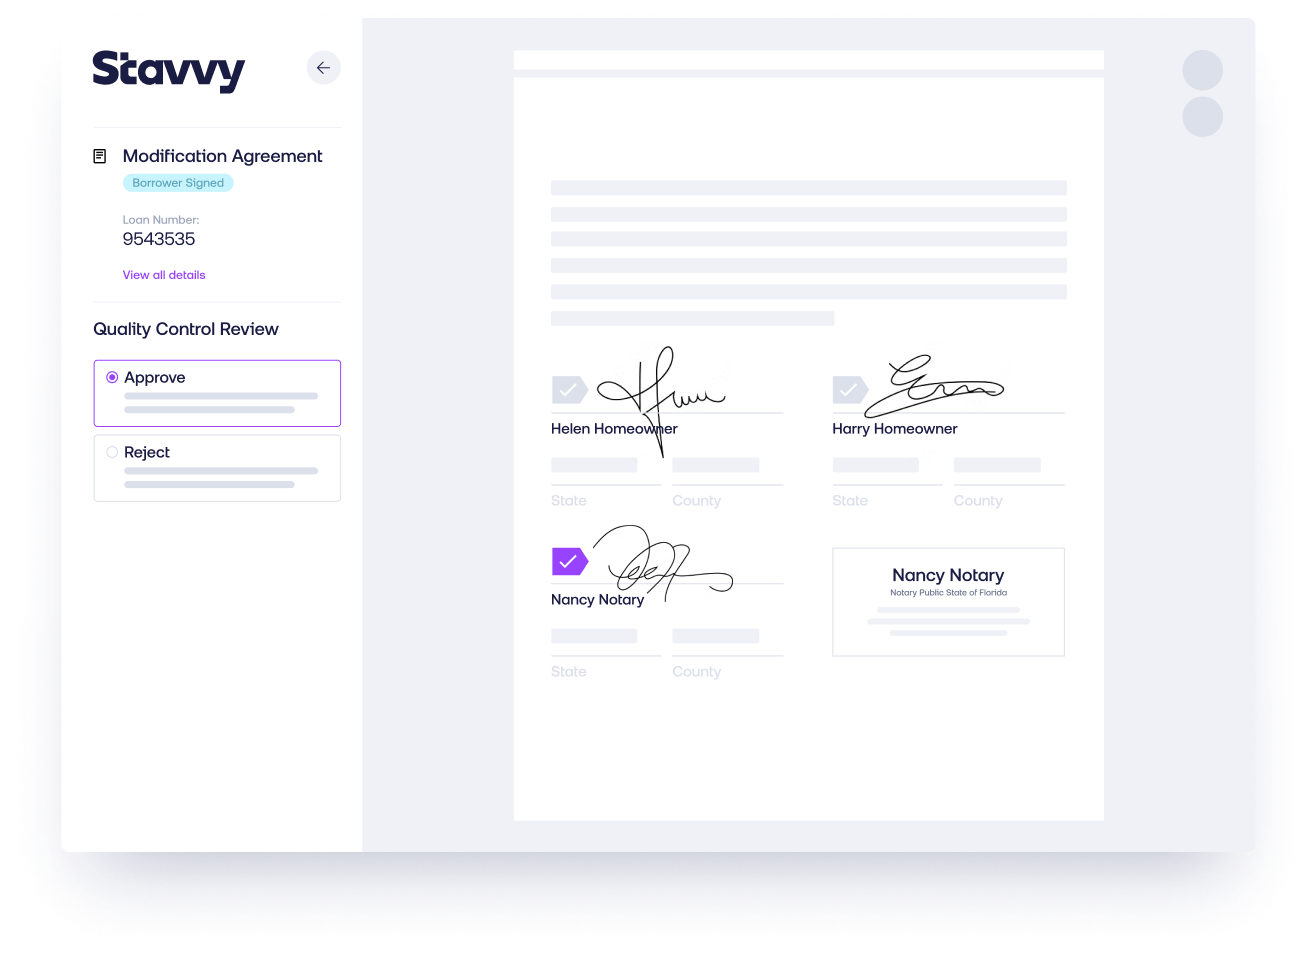 Illustration of loan servicing software from the Stavvy platform